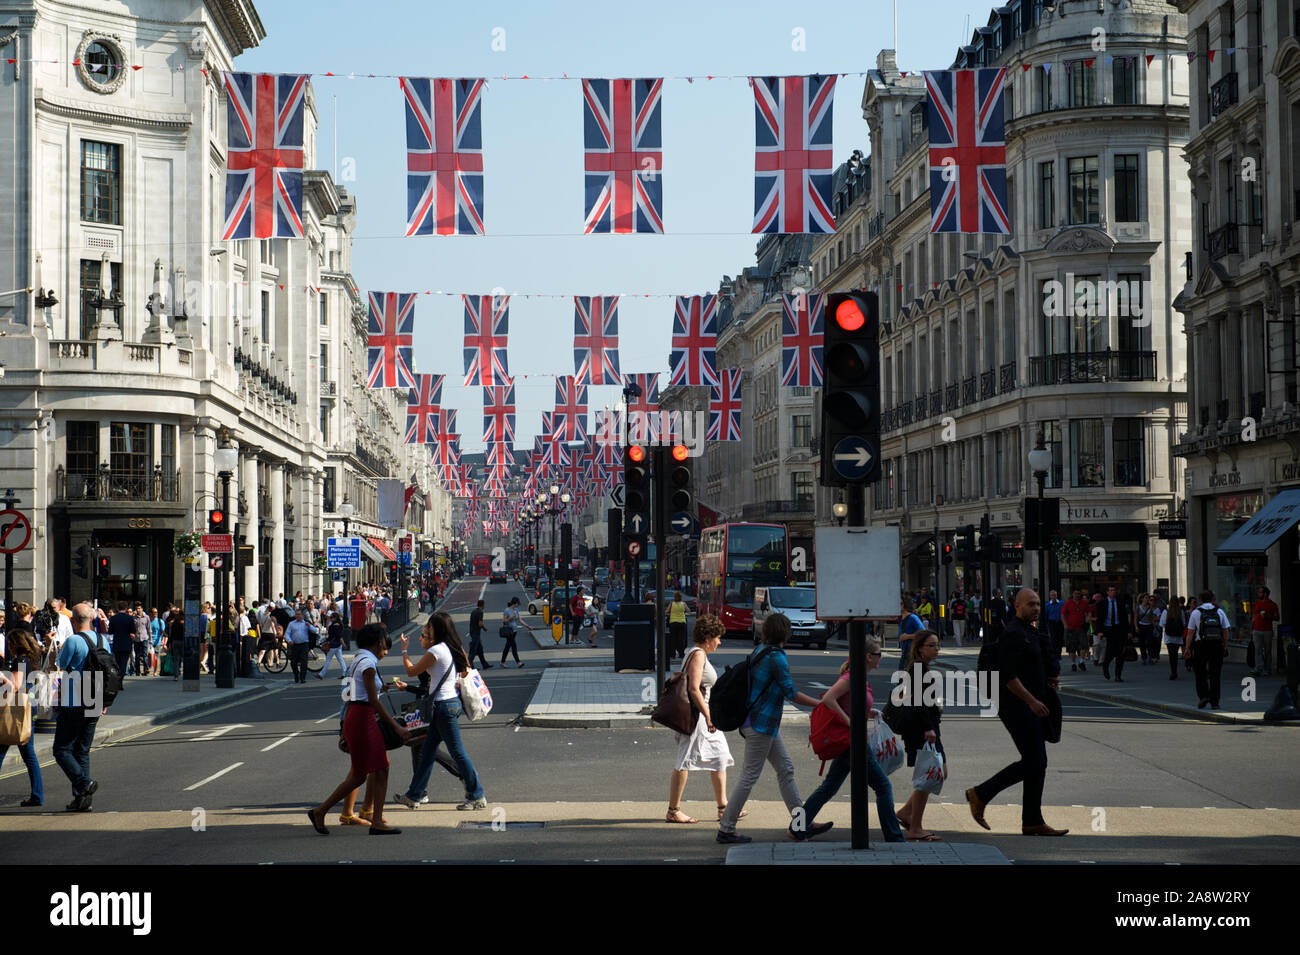 LONDON - MAY 24, 2012: British Union Jack flags decorate a busy intersection full of pedestrians in the Regent Street shopping district. Stock Photo